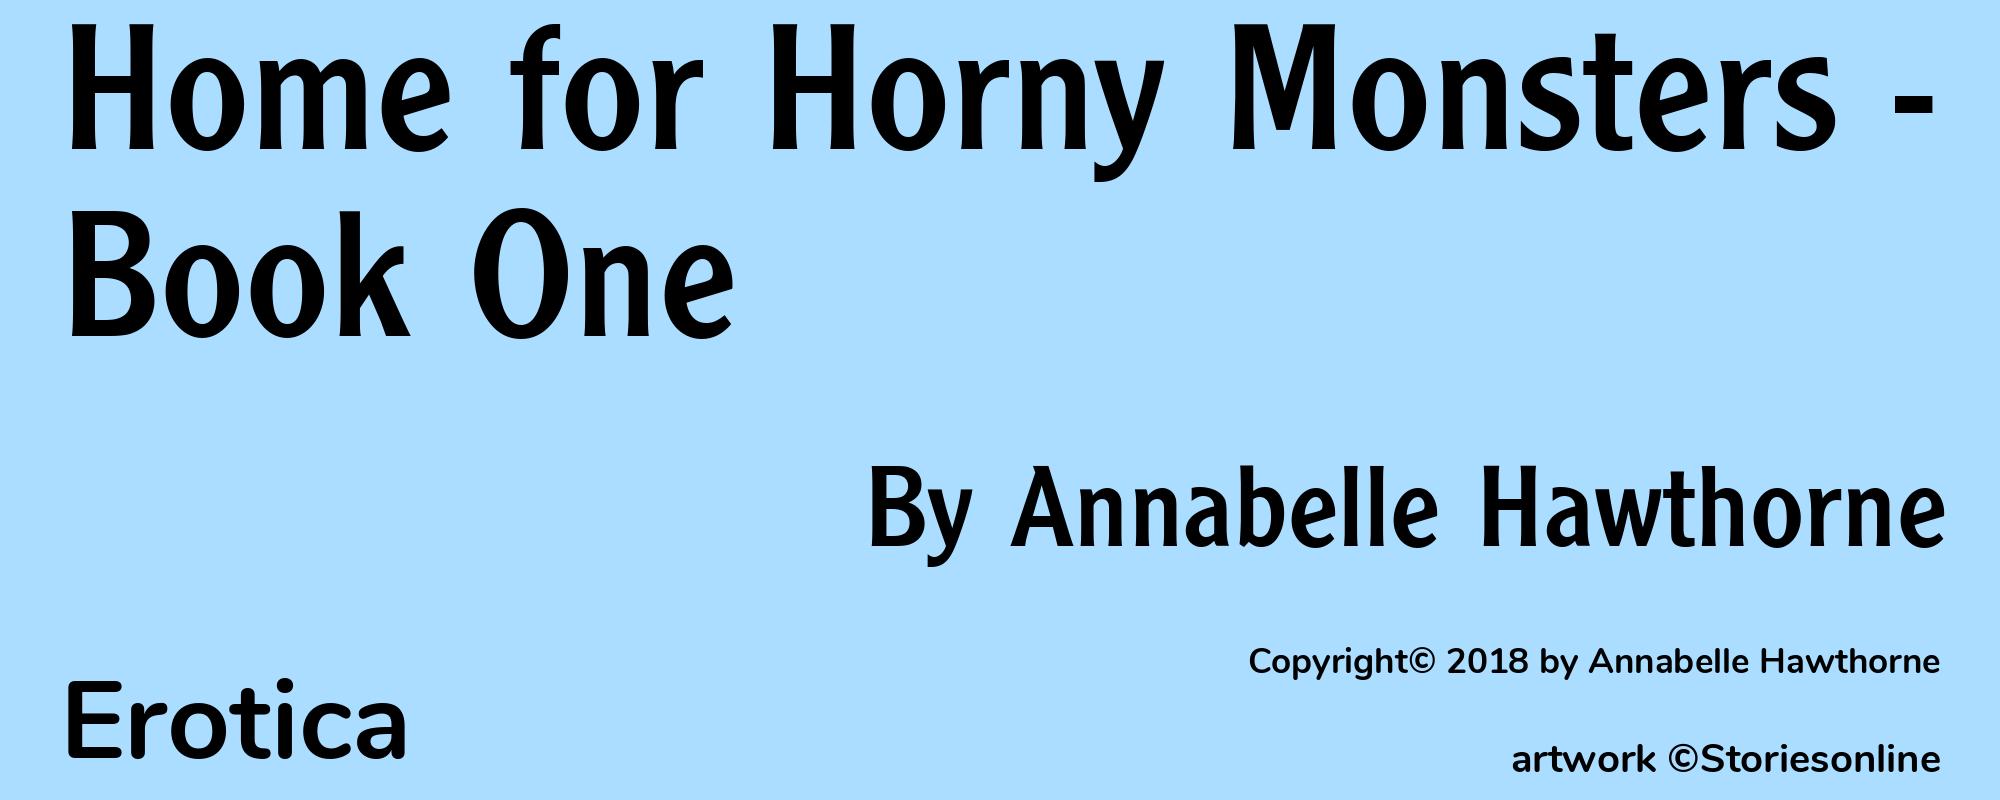 Home for Horny Monsters - Book One - Cover